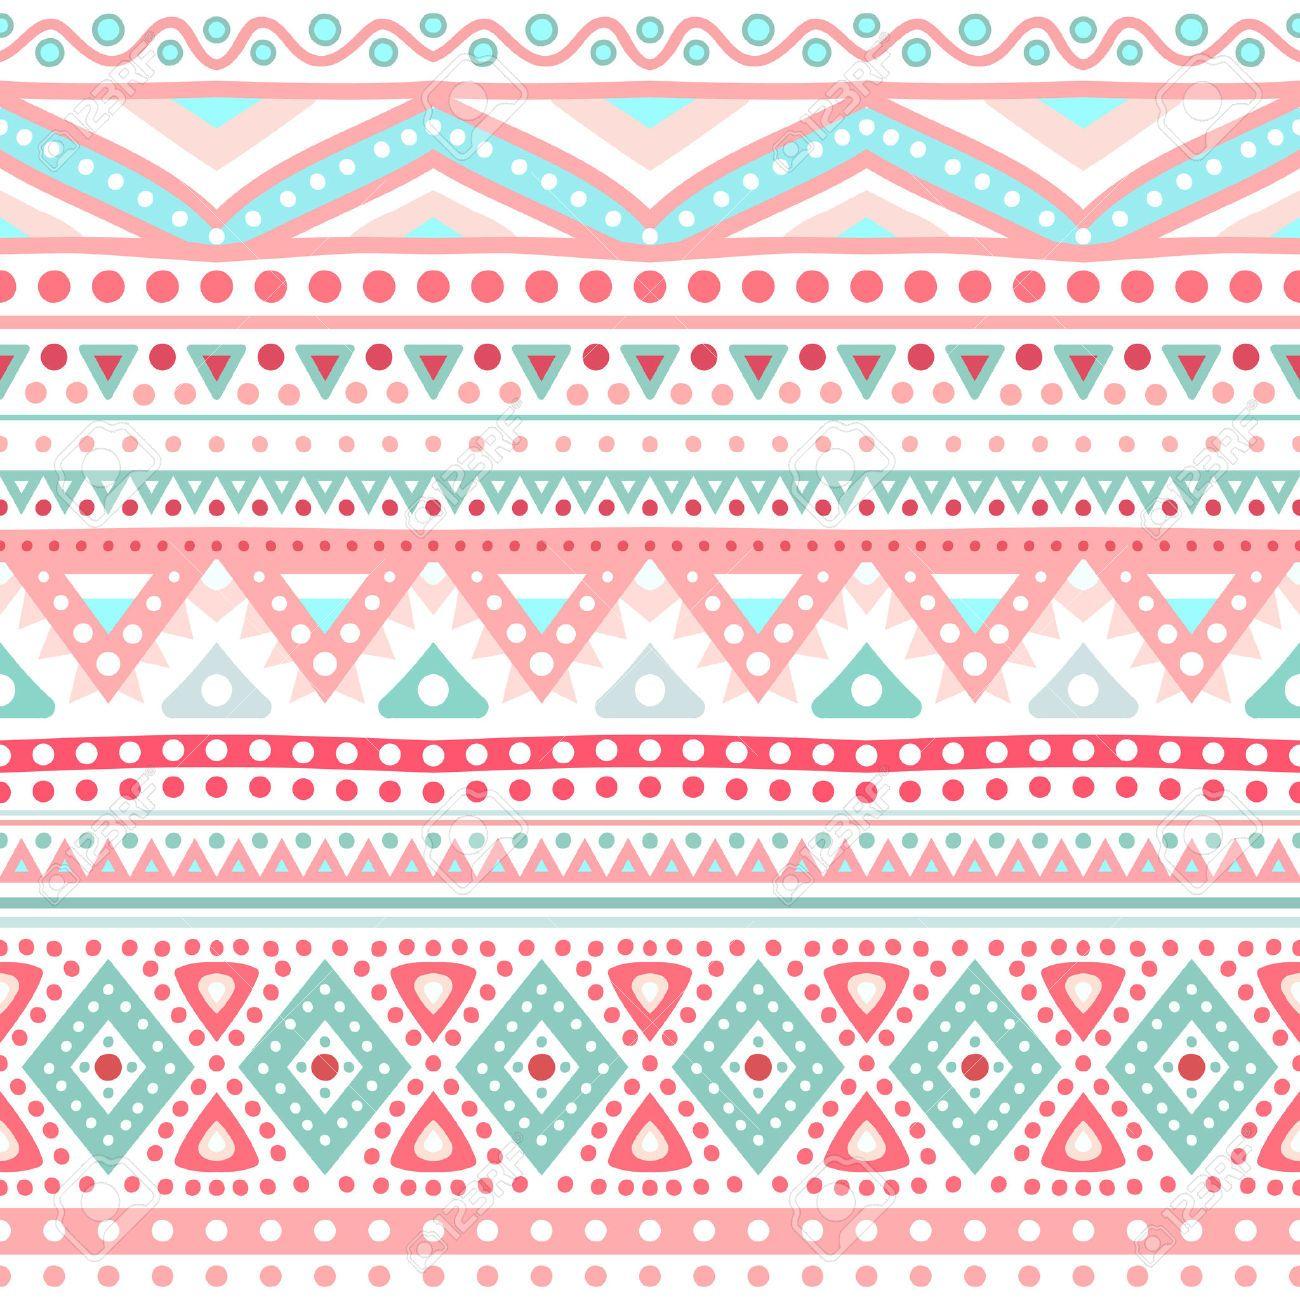 cute background patterns tumblr 2. Background Check All